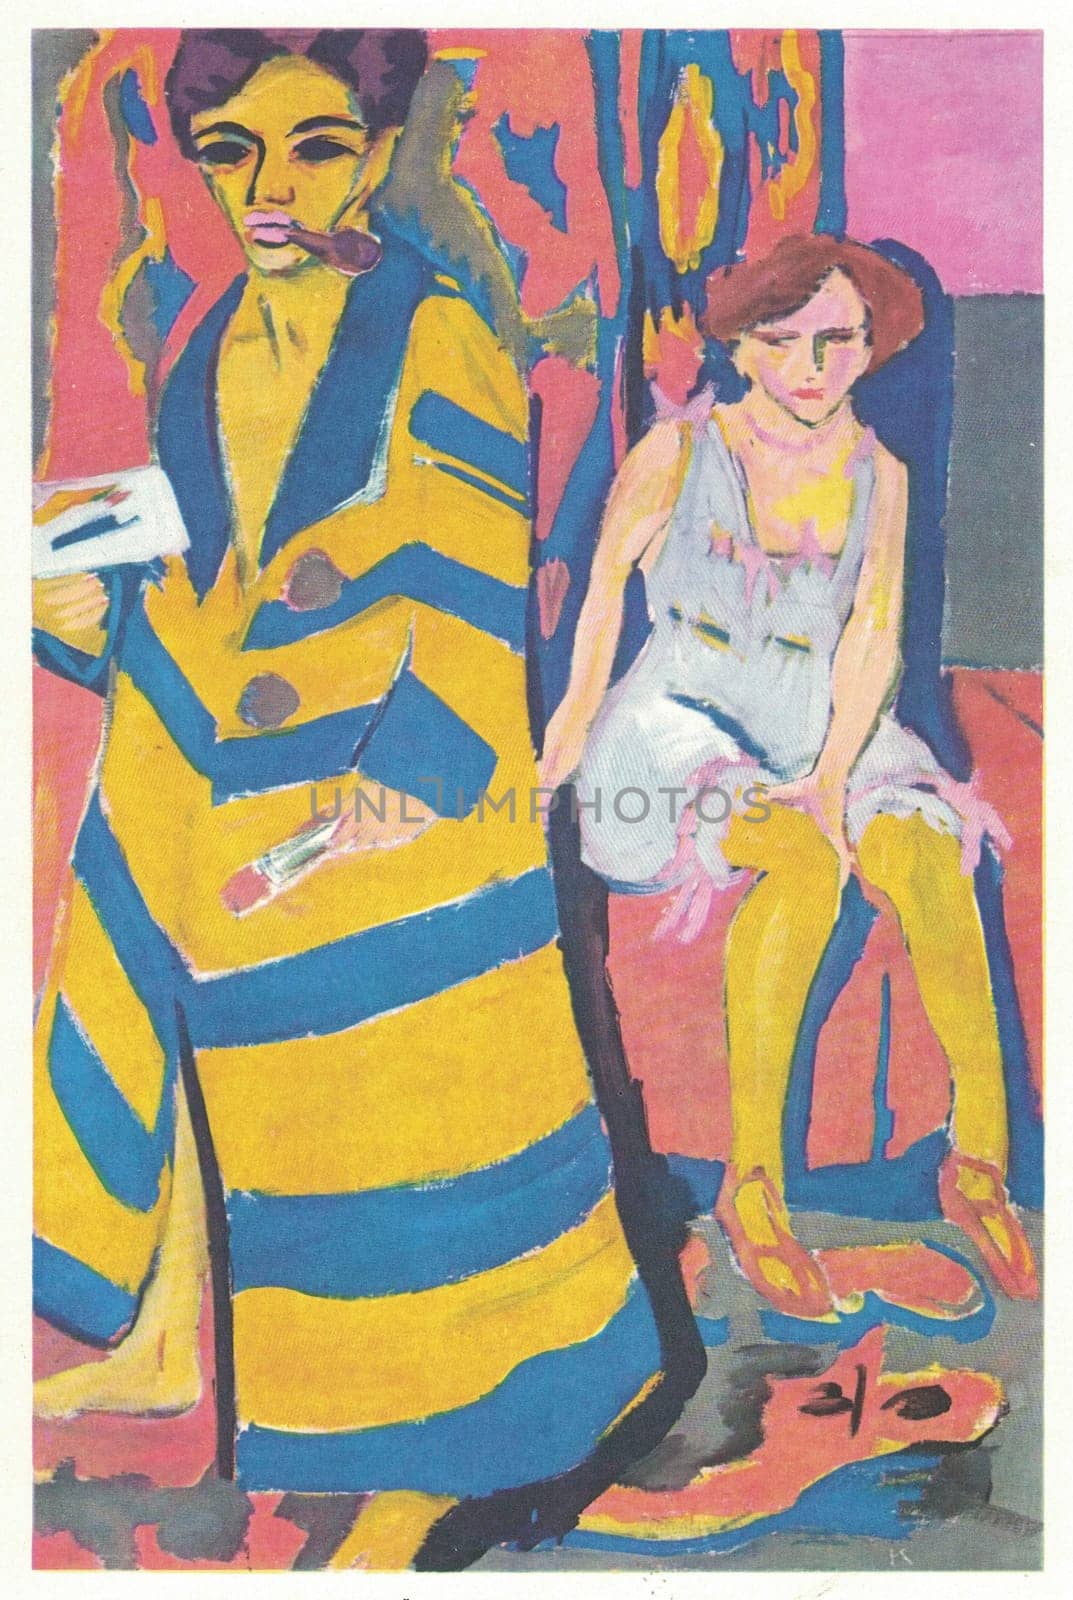 Self-Portrait With Model (1910) by Ernst Ludwig Kirchner. When I look at this painting, a pleasurable sensation of anarchy gathers in me. The image has a glorious disruptive quality about it — you might almost say an aggression — which is simultaneously stirred and soothed by its wildly optimistic colouration. The painting is of a man and woman, the artist and his model. She is sat on a chest or a box, wearing a pale blue chemise decorated in pink ribbons, the same pink that blush her cheeks. She appears to be looking at the artist askance, a look of suspicion that makes the him the true subject of the work.